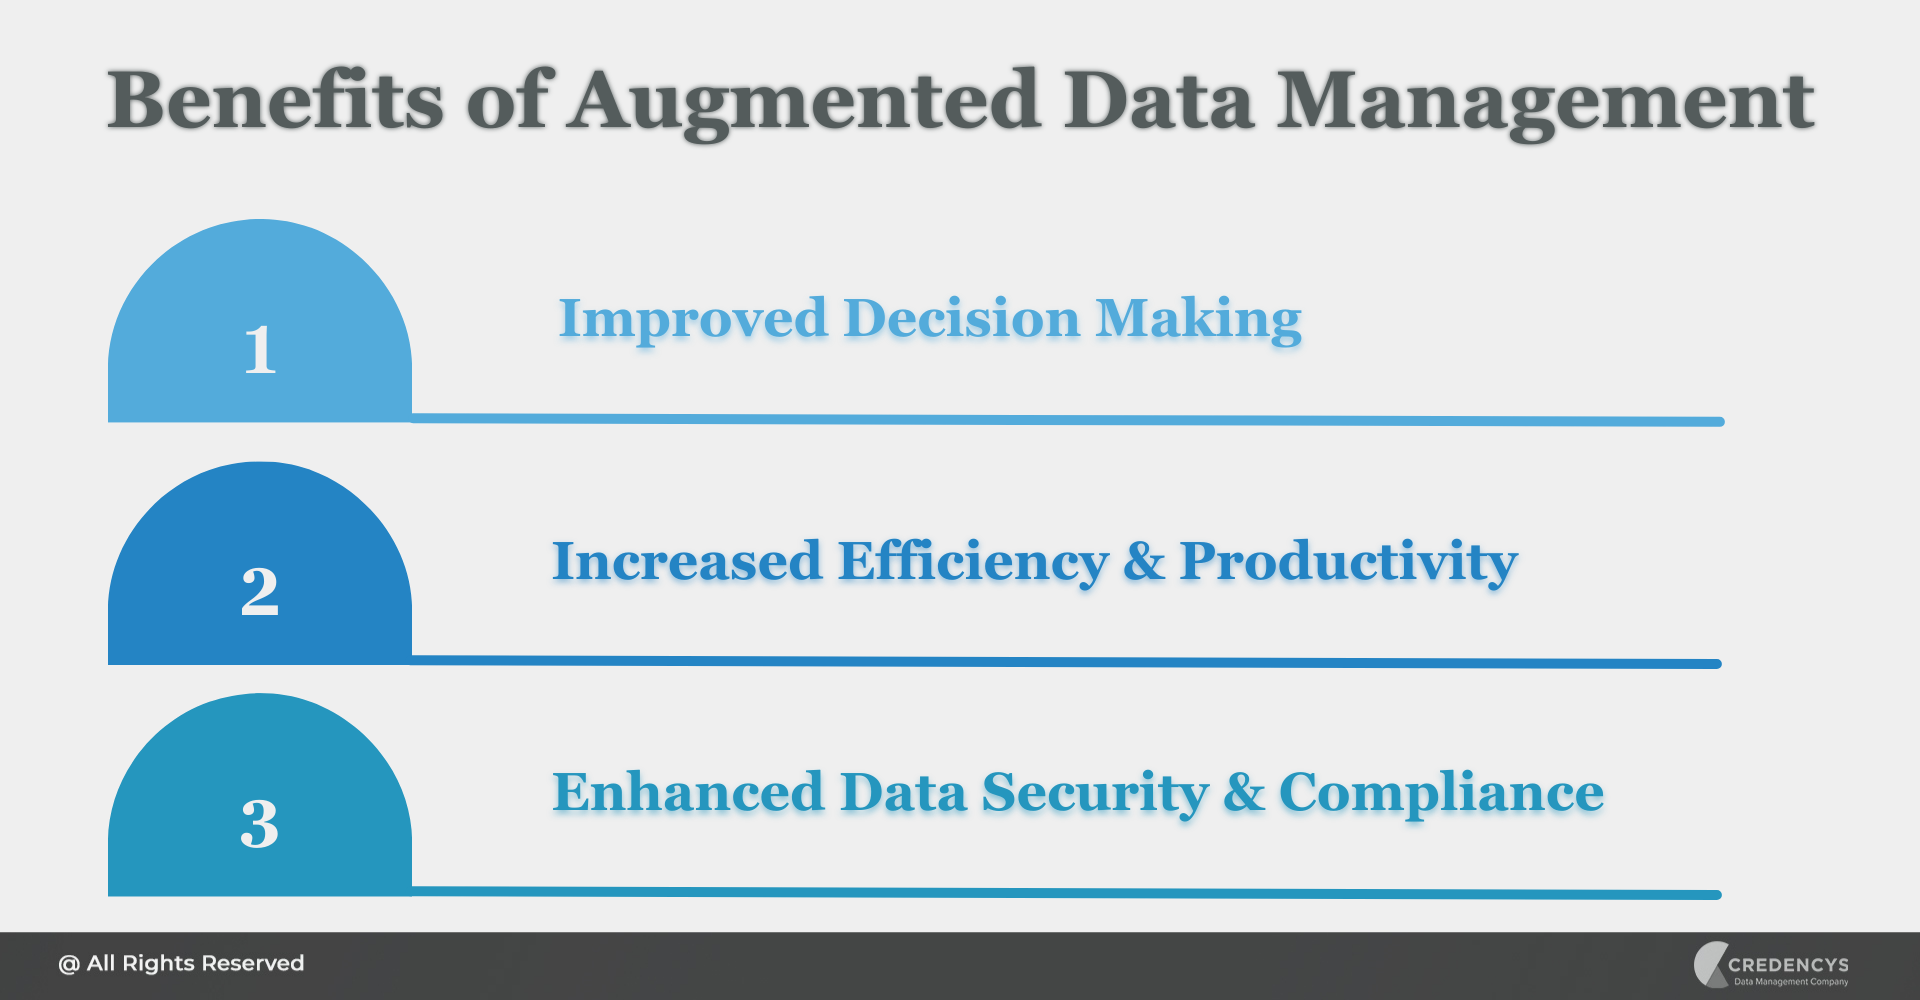 Benefits of Augmented Data Management